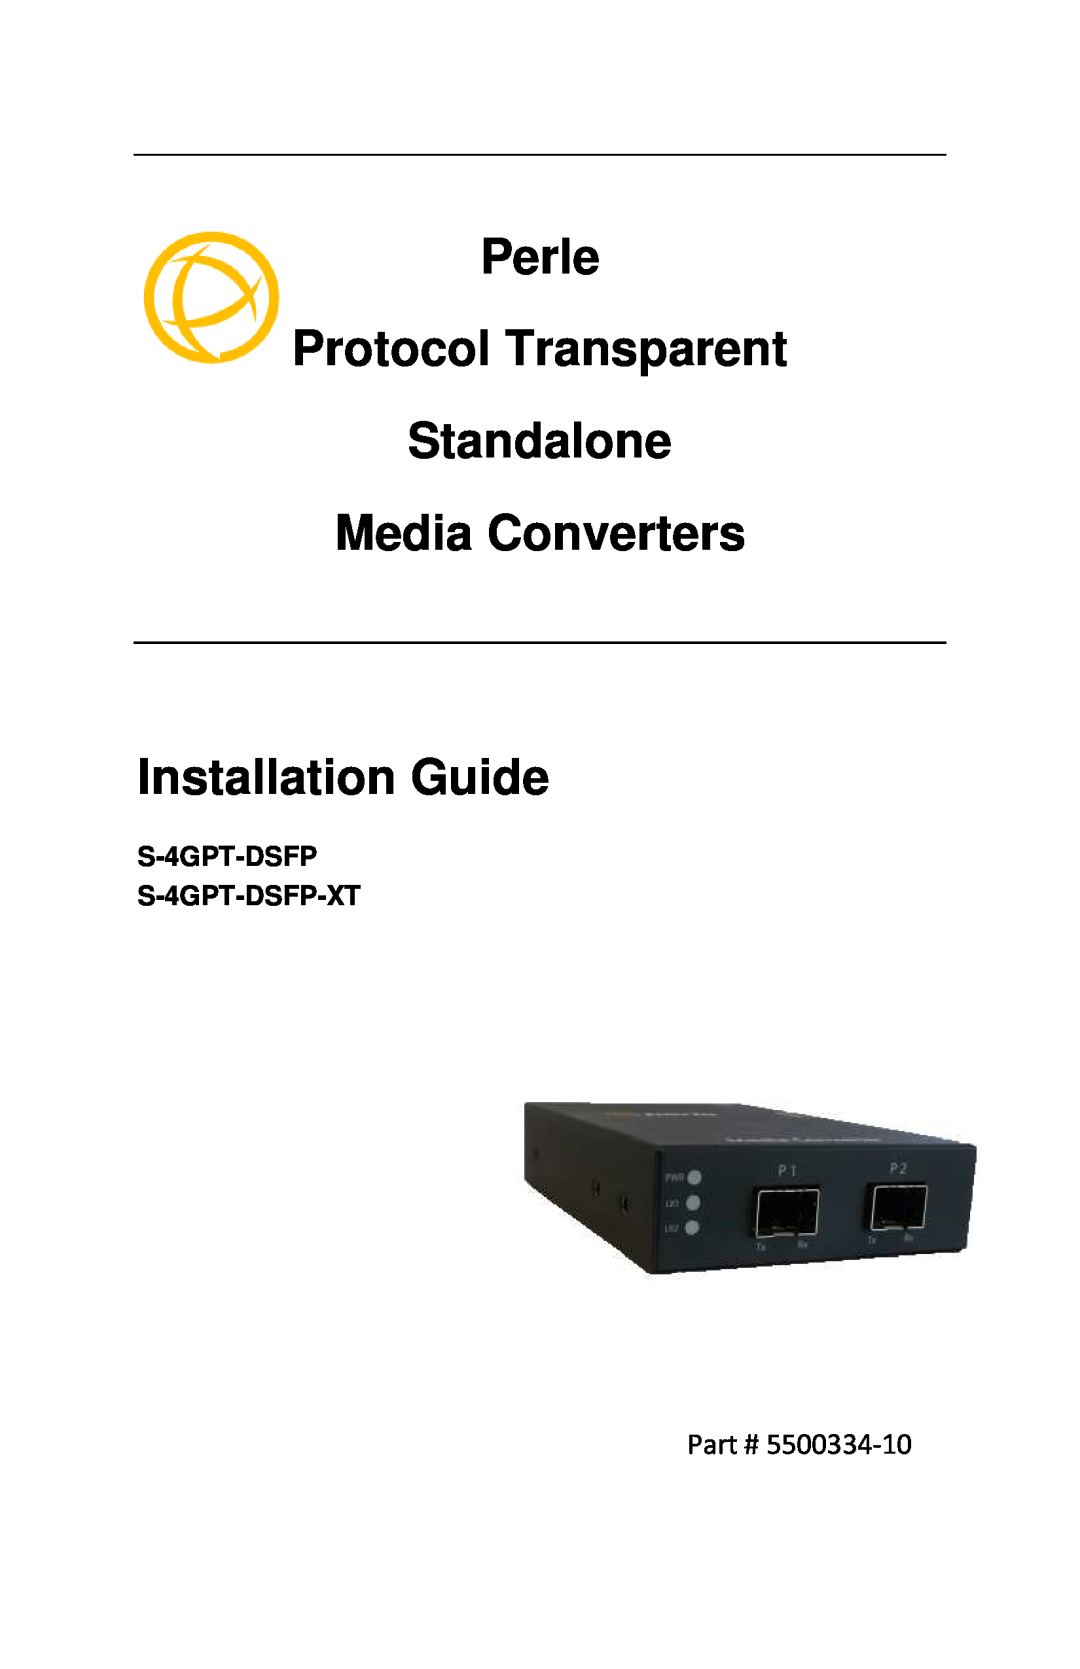 Perle Systems manual S-4GPT-DSFP S-4GPT-DSFP-XT, Perle Protocol Transparent Standalone Media Converters, 5500334-10 